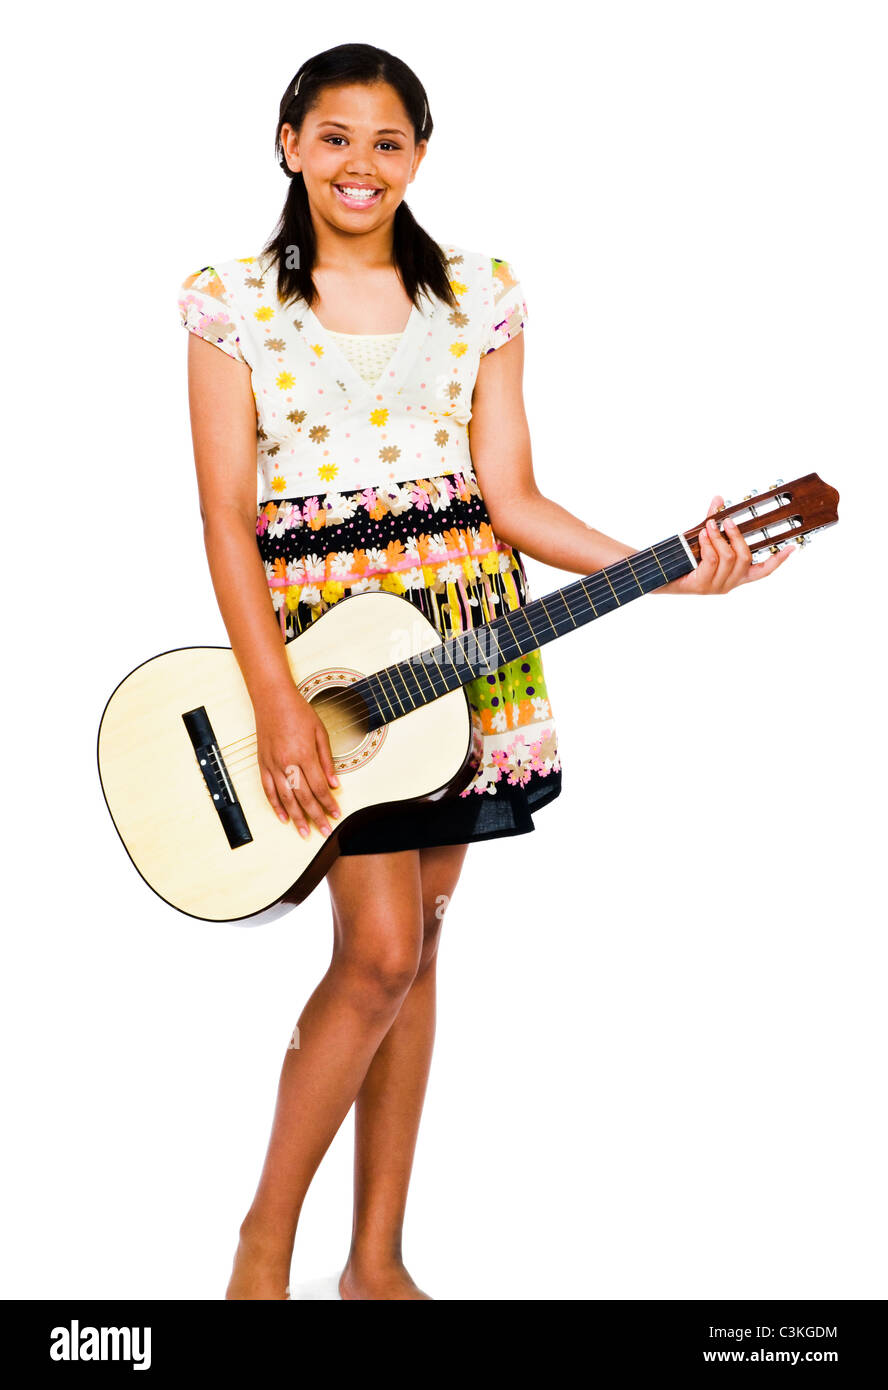 Teenage girl standing playing guitar Cut Out Stock Images & Pictures - Alamy